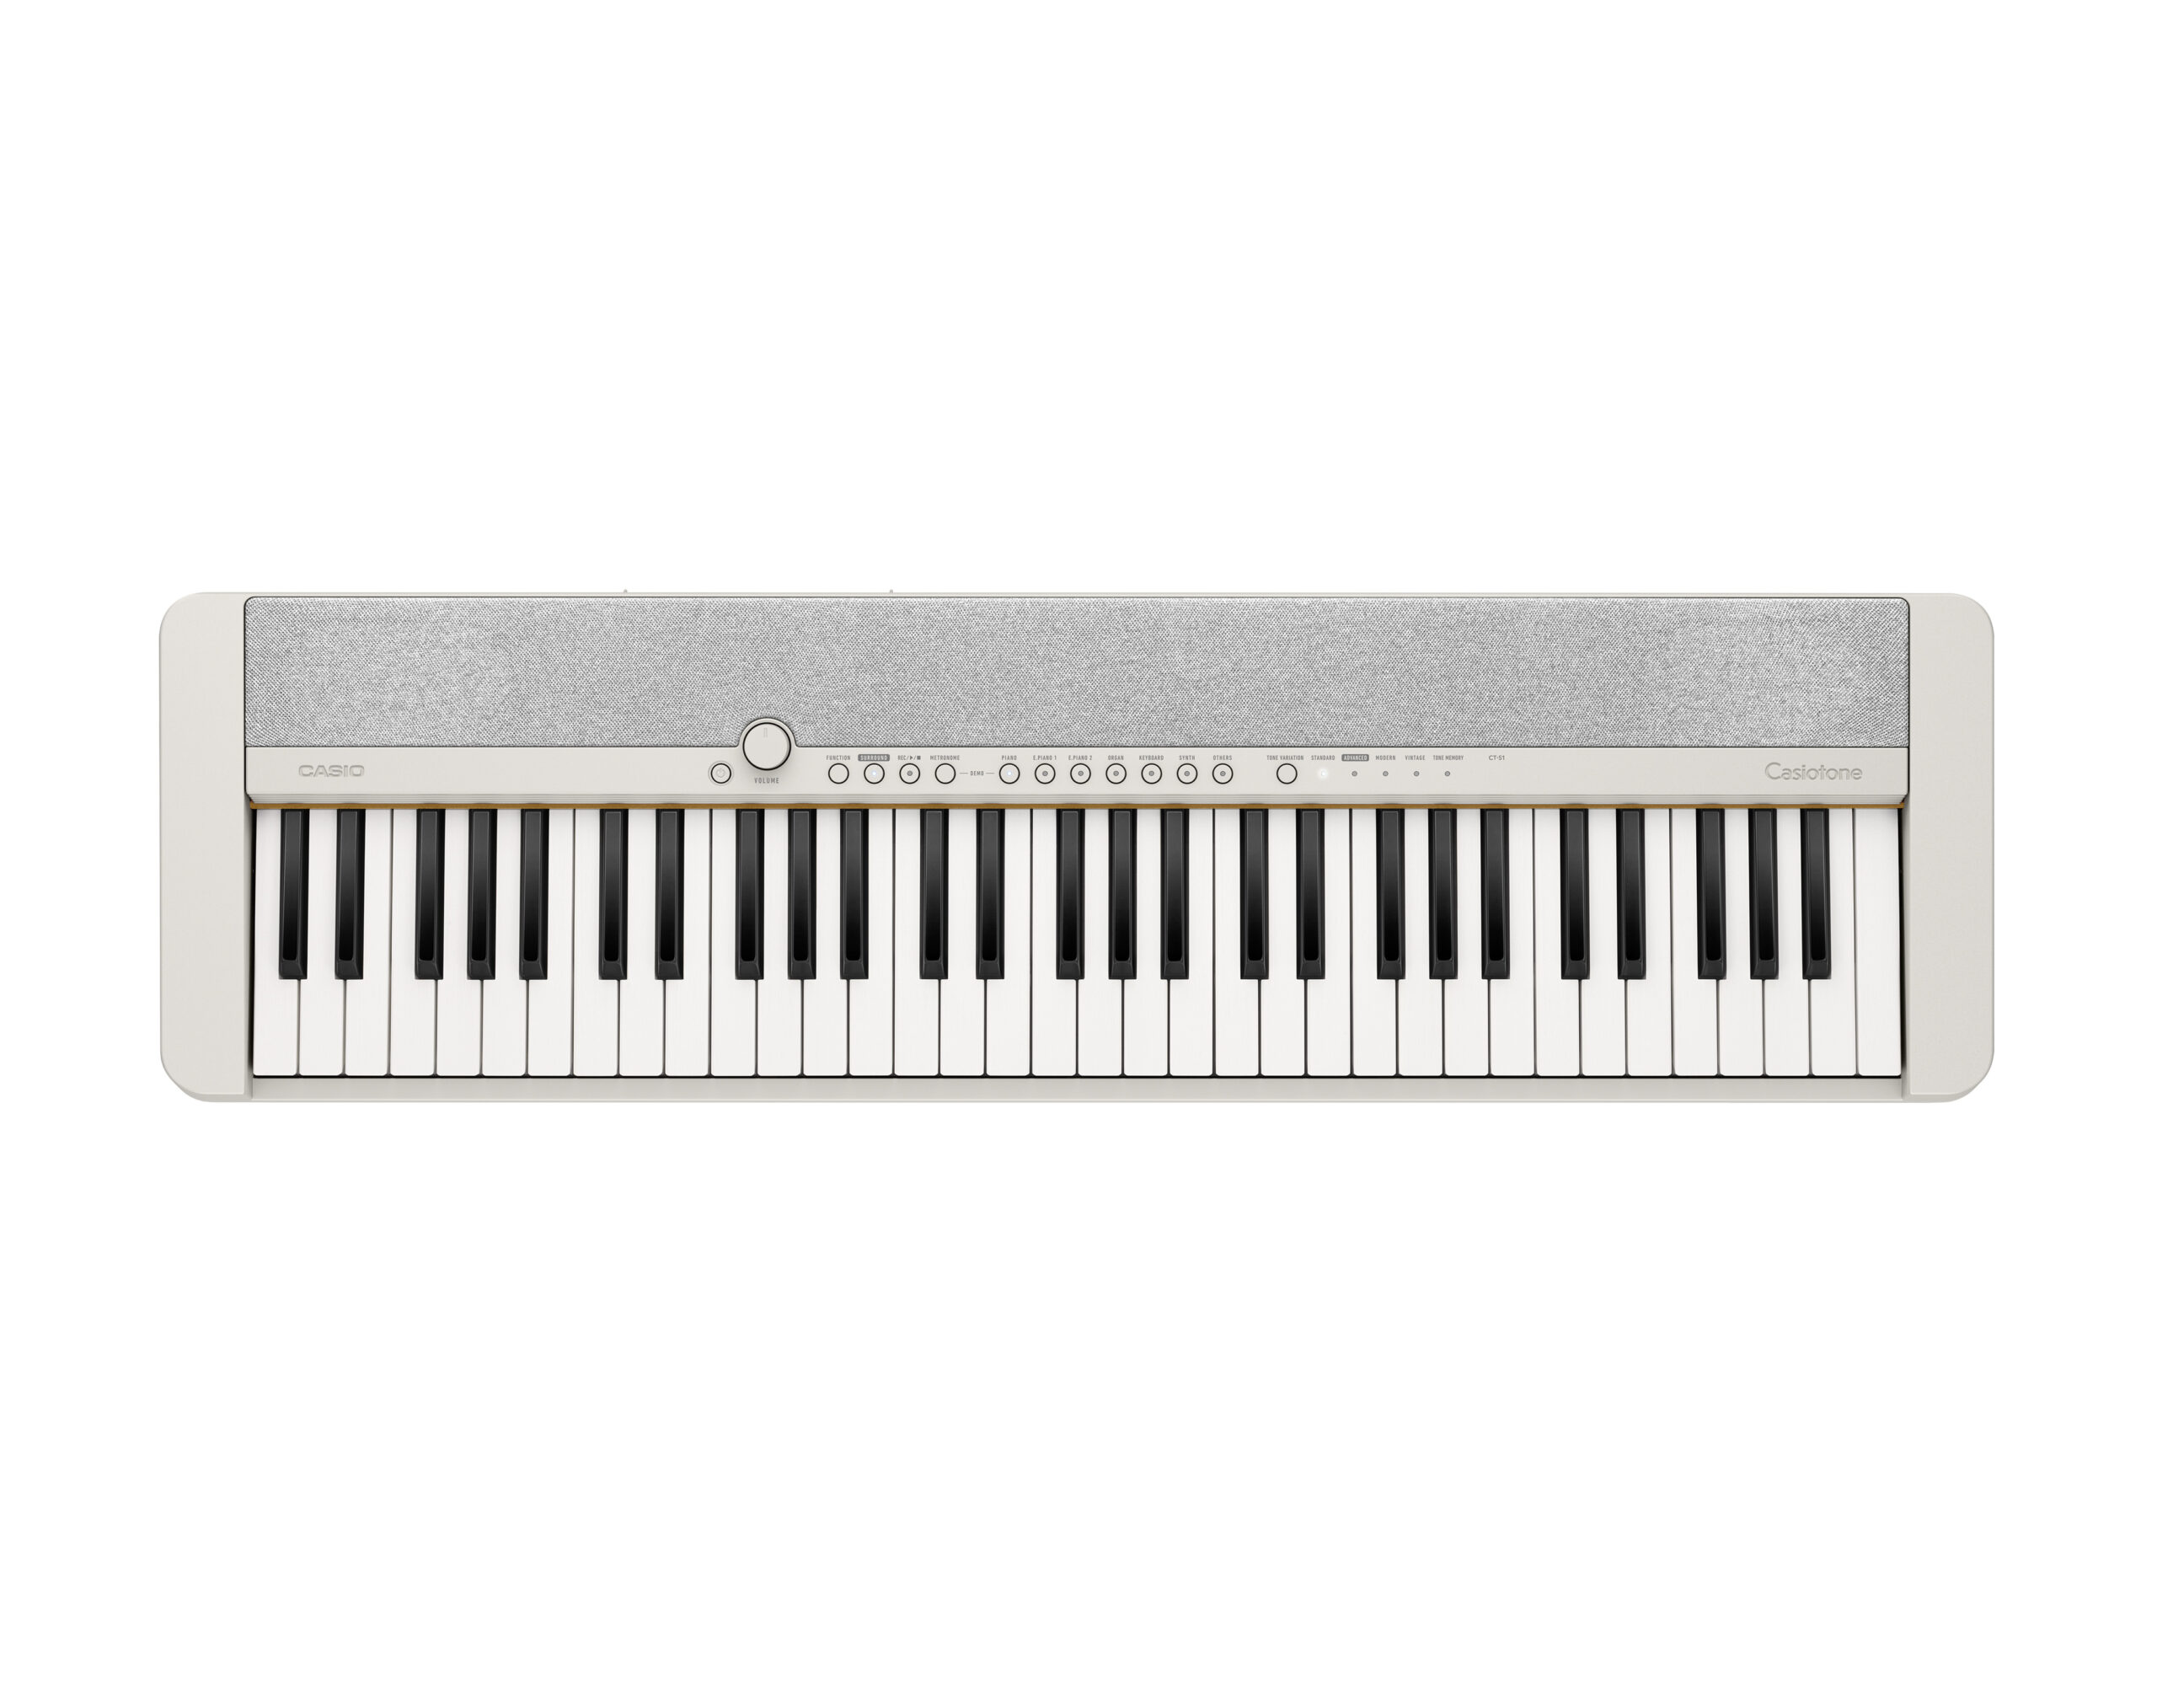 Give the The Casiotone CT-S1WE by Casio as a holiday gift